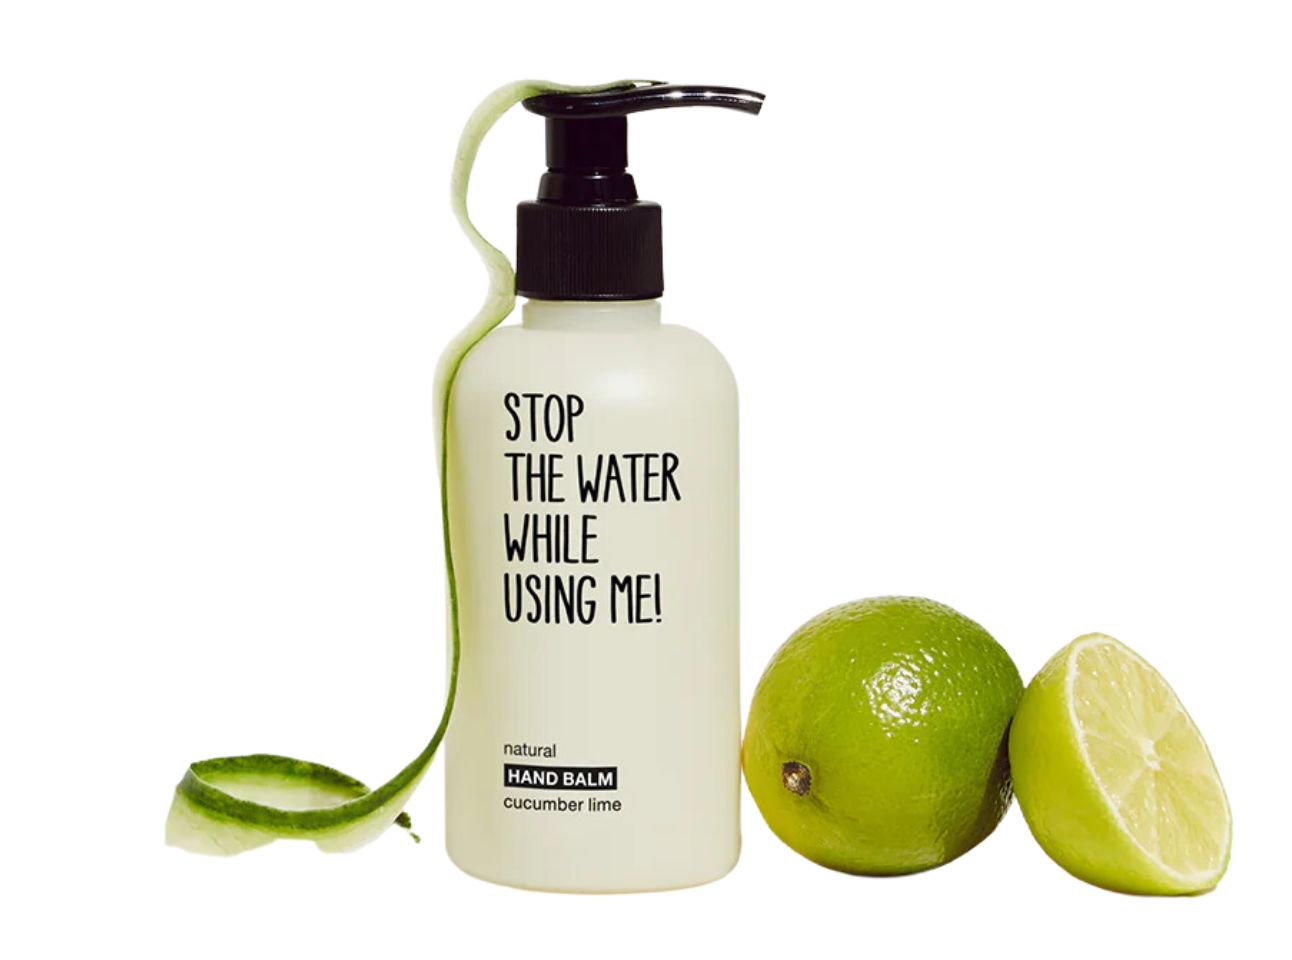 STOP THE WATER WHILE USING ME I HAND BALM I CUCUMBER LIME HAND BALM I 200ml  